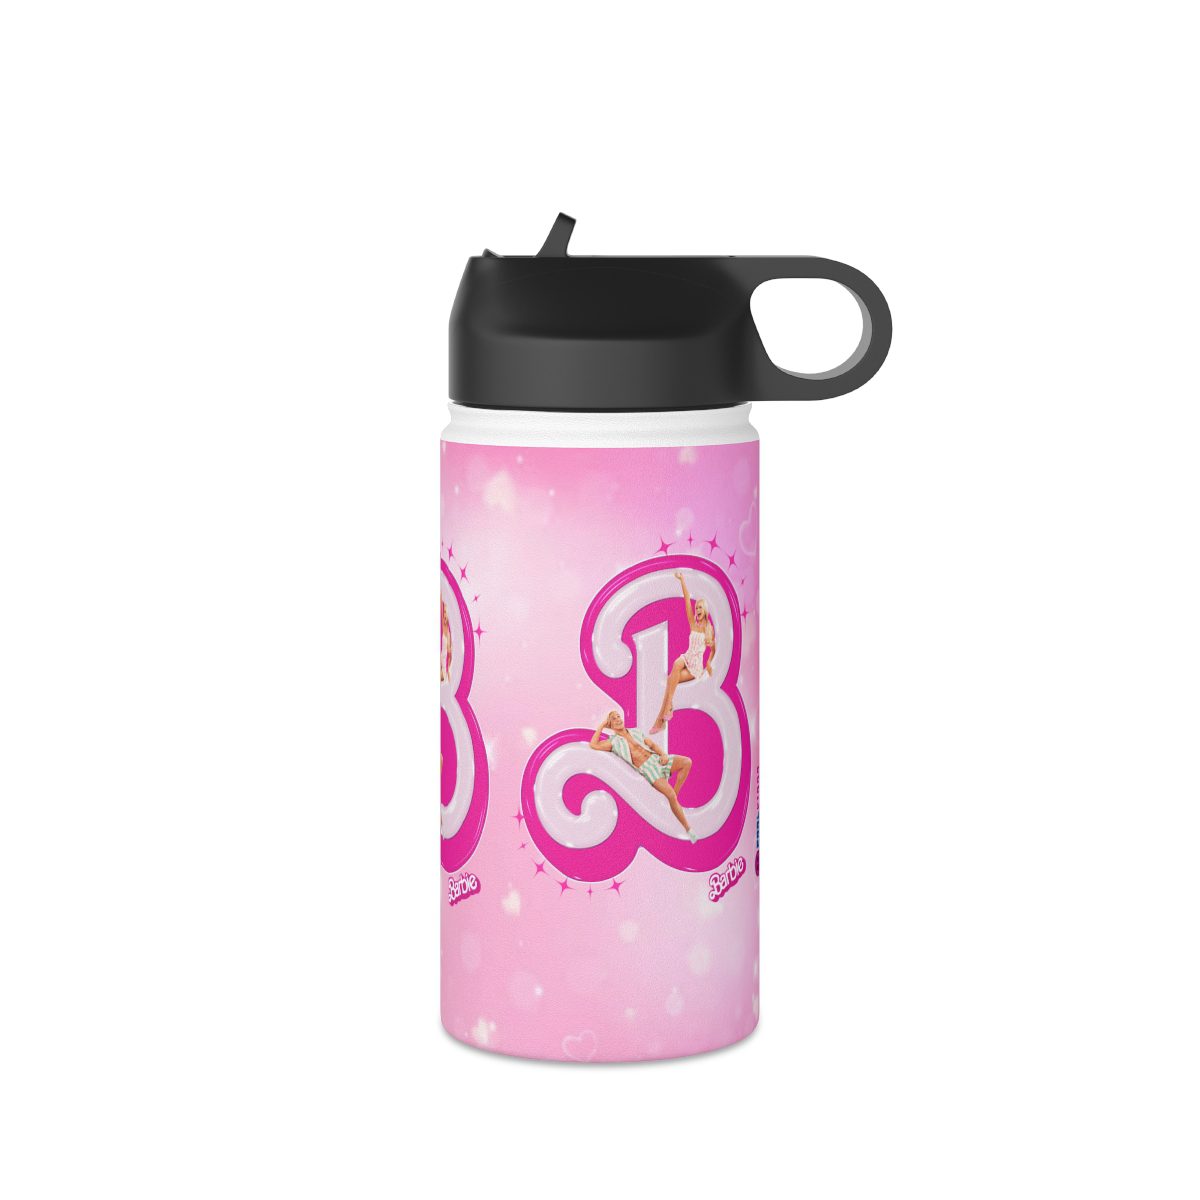 Barbie Movie 2023 Insulated Stainless Steel Water Bottle Cool Kiddo 16